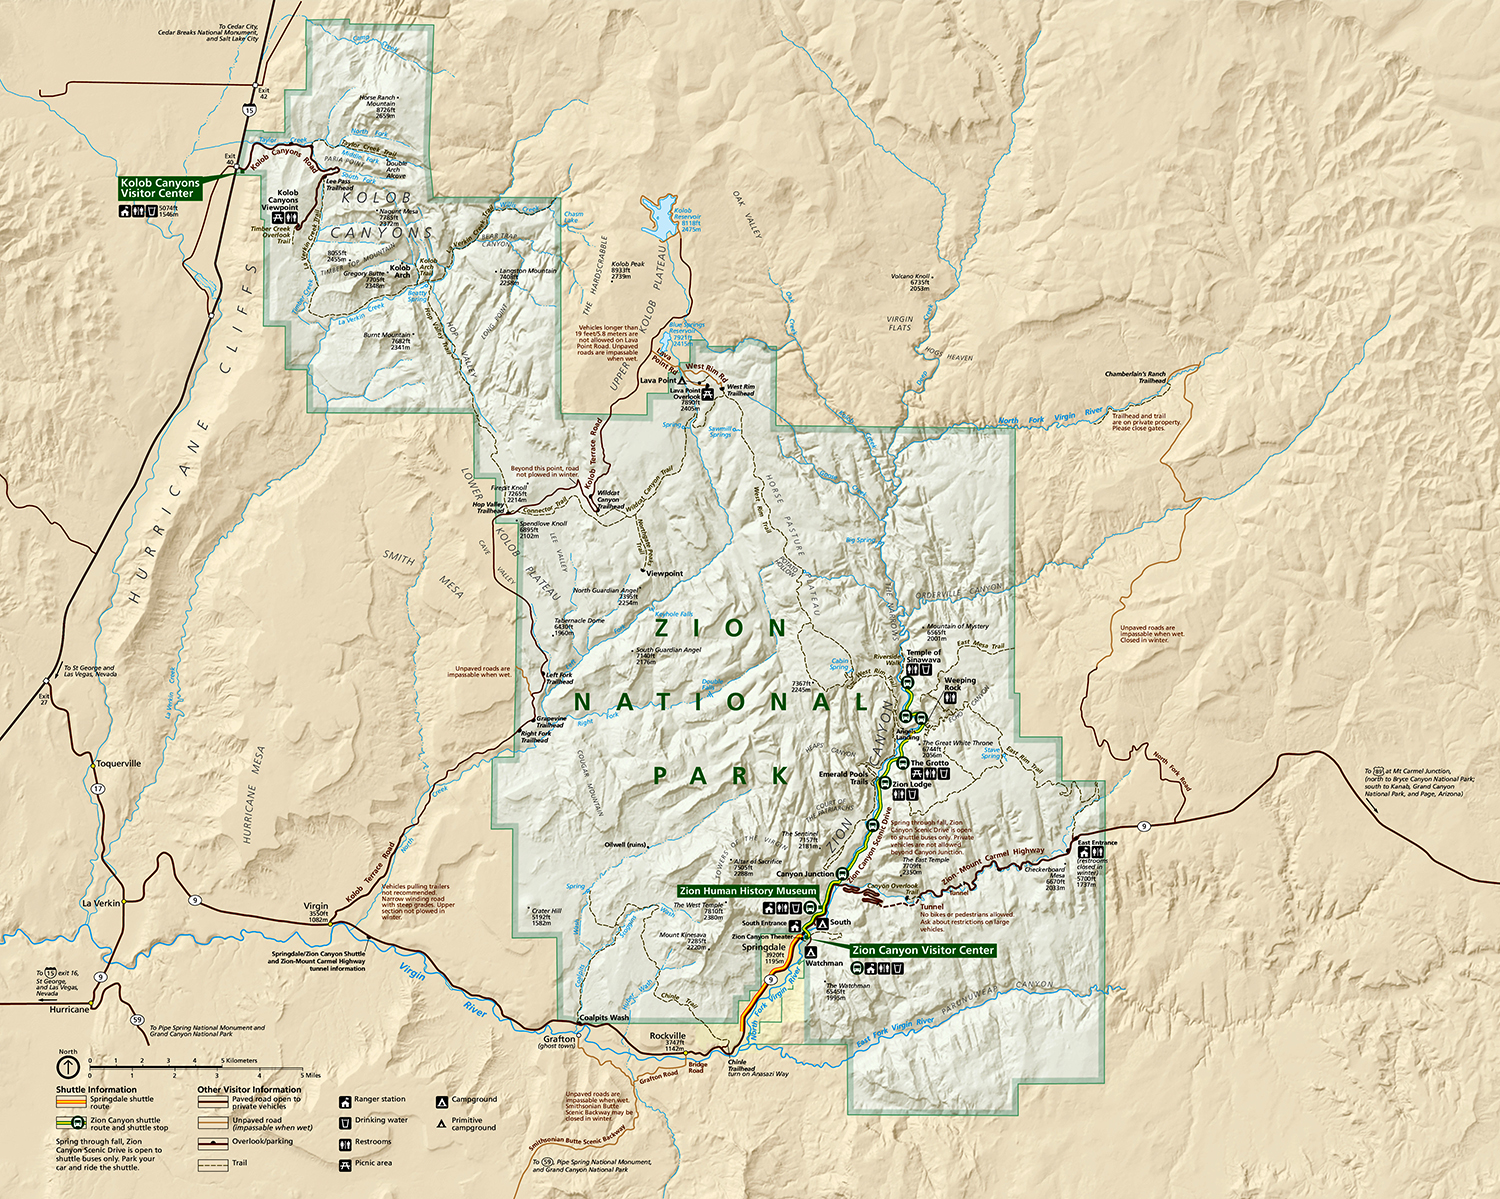 Park Junkies Map Of Zion National Park Plan Your Visit To This Park